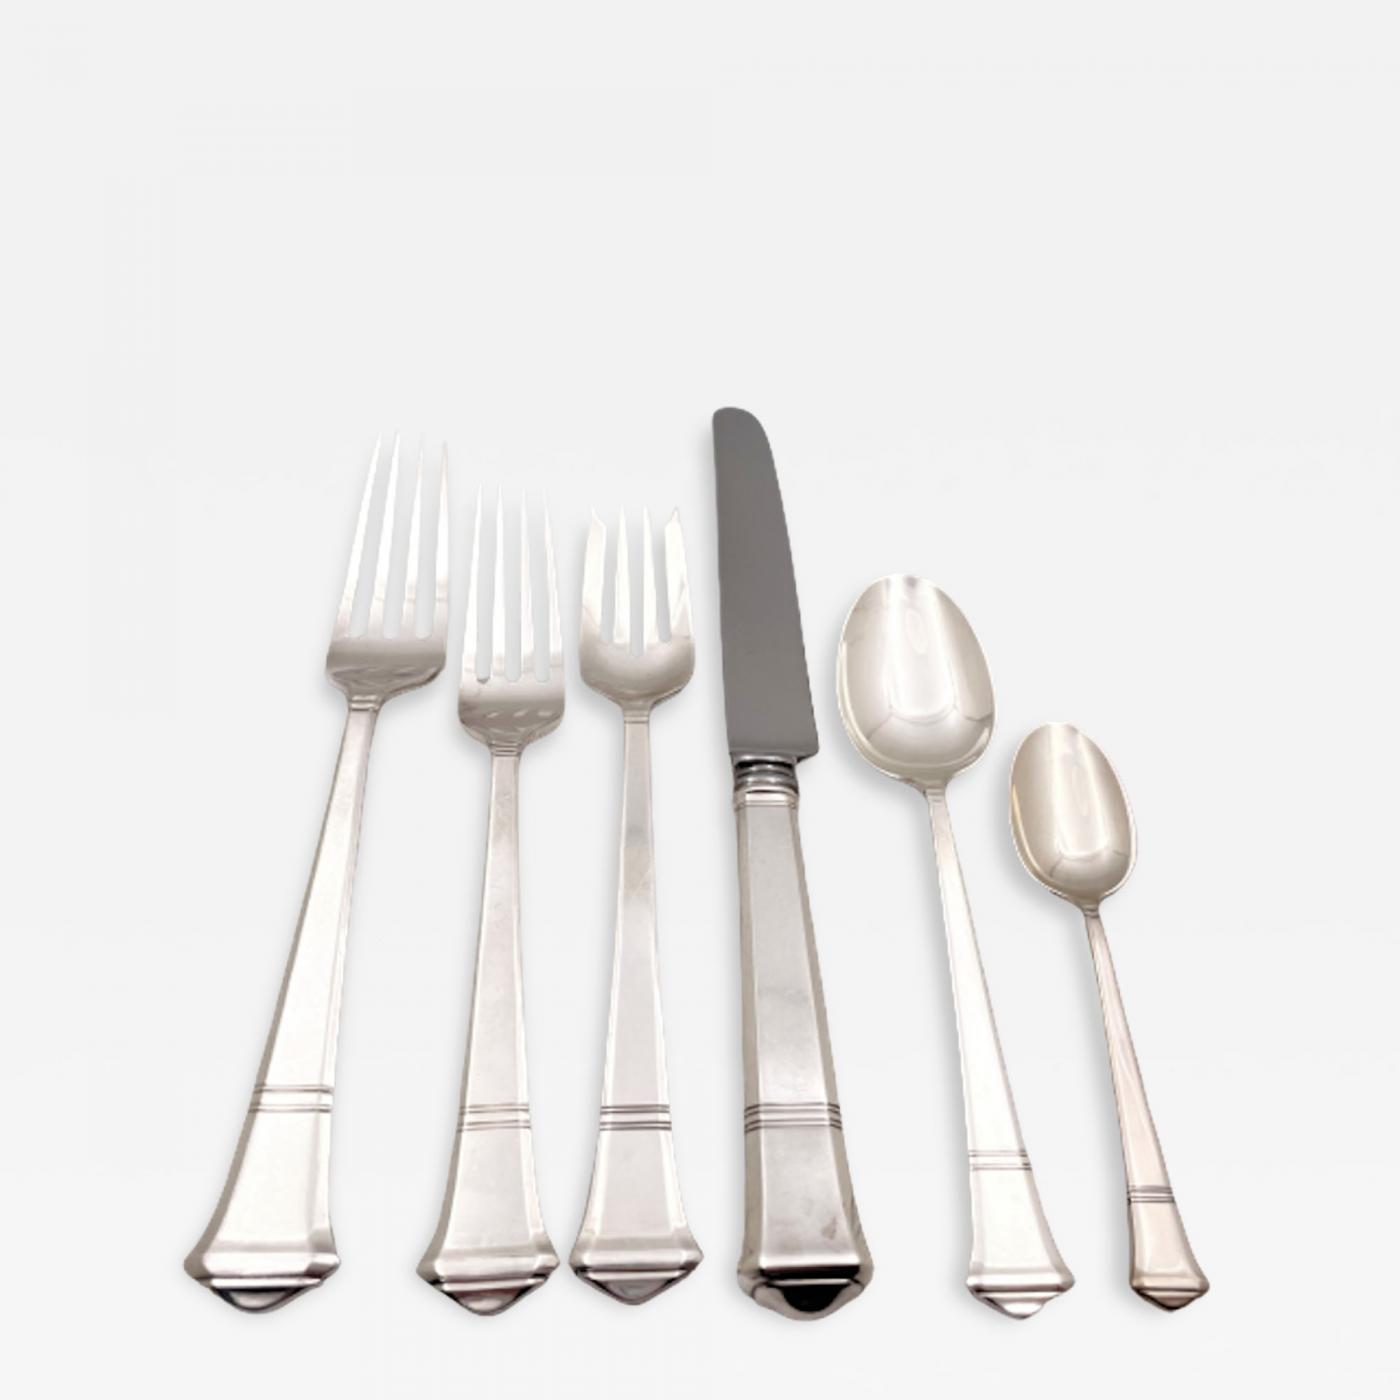 https://cdn.incollect.com/sites/default/files/zoom/-Tiffany-Co-Tiffany-Co-Sterling-Silver-1923-48-Piece-Flatware-Set-in-Art-Deco-Style-664346-3241433.jpg